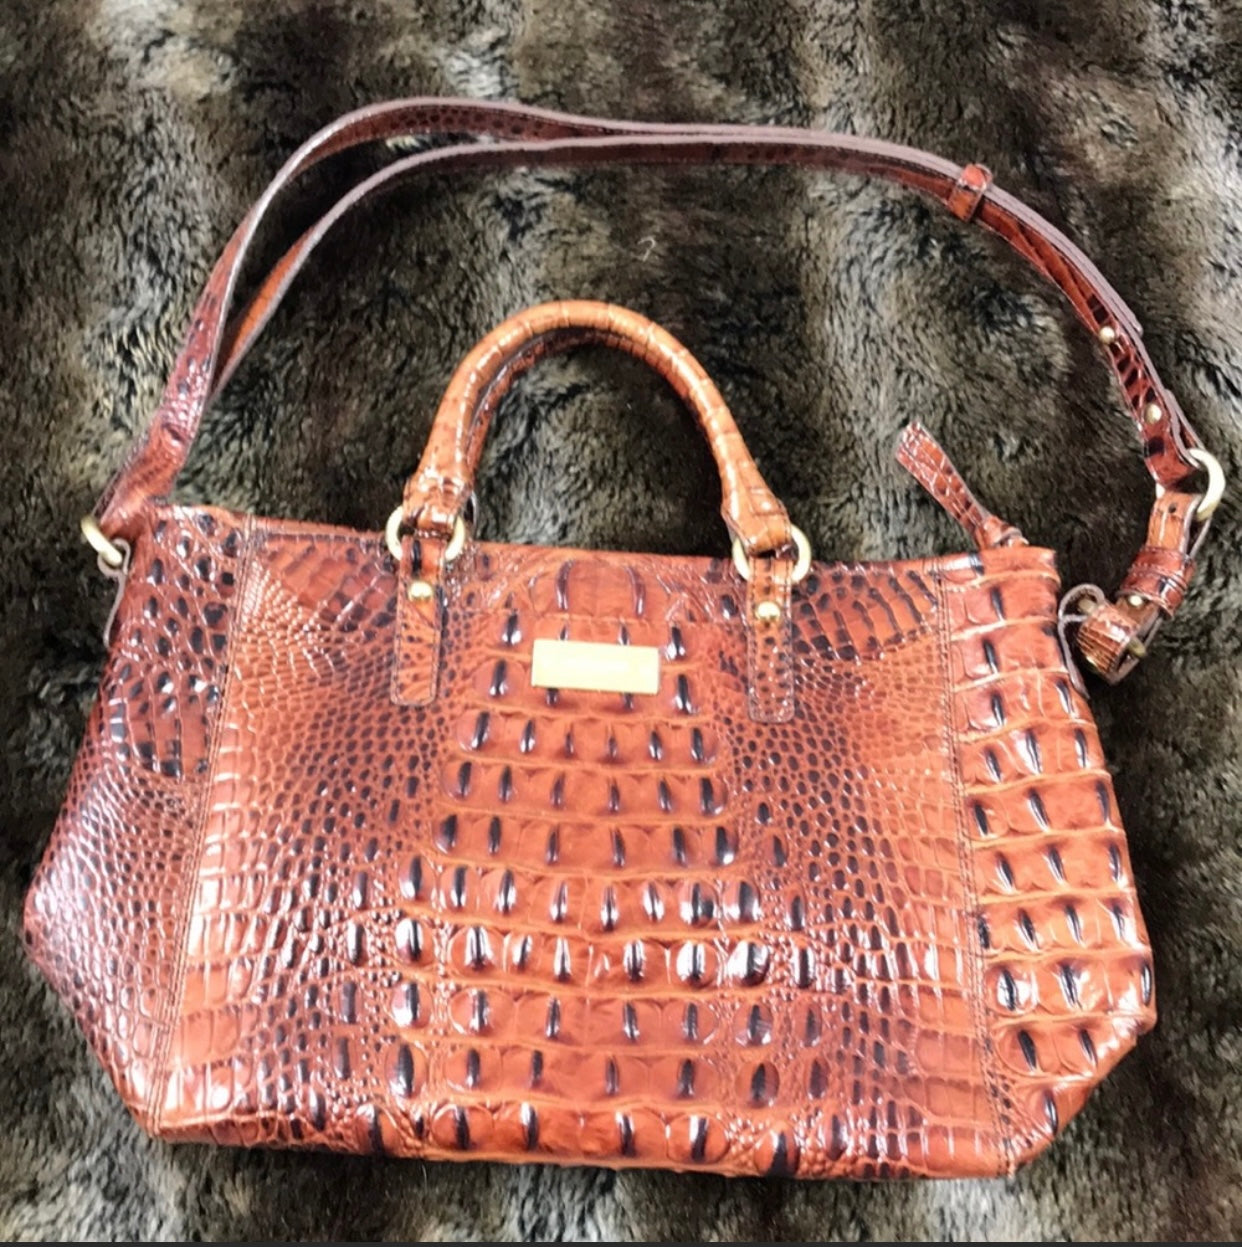 Excellent Condition ~ Brahmin Toasted Almond Satchel!